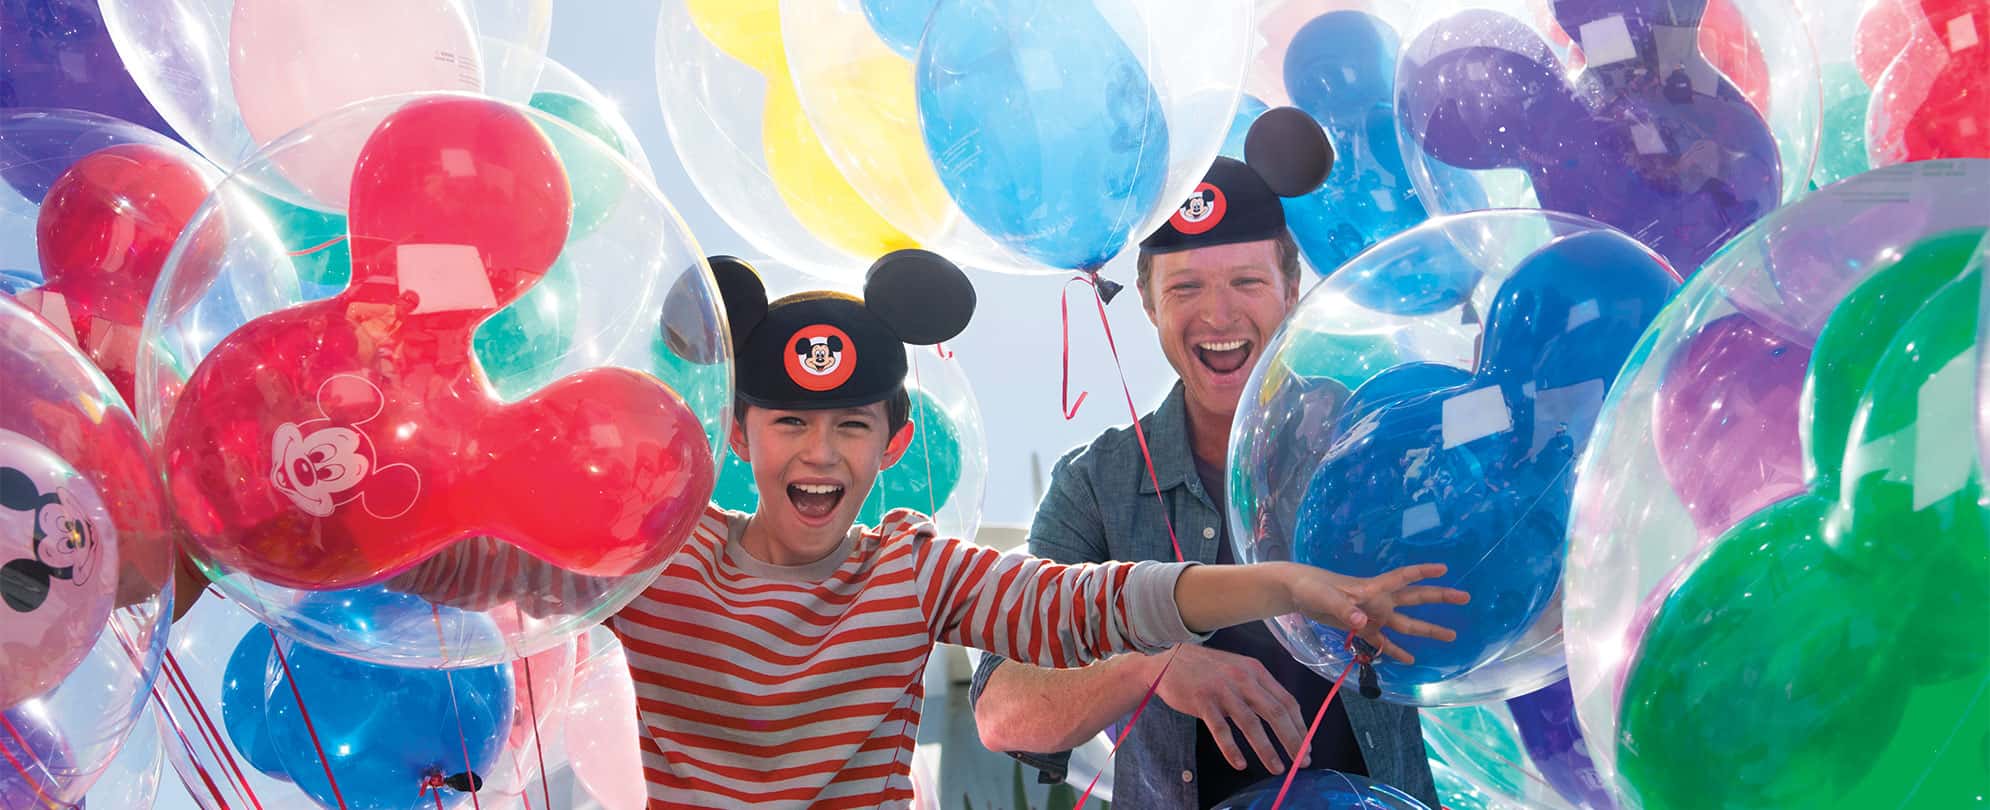 A kid and his dad wearing Mickey Mouse hats surrounded by colorful balloons at Disneyland.